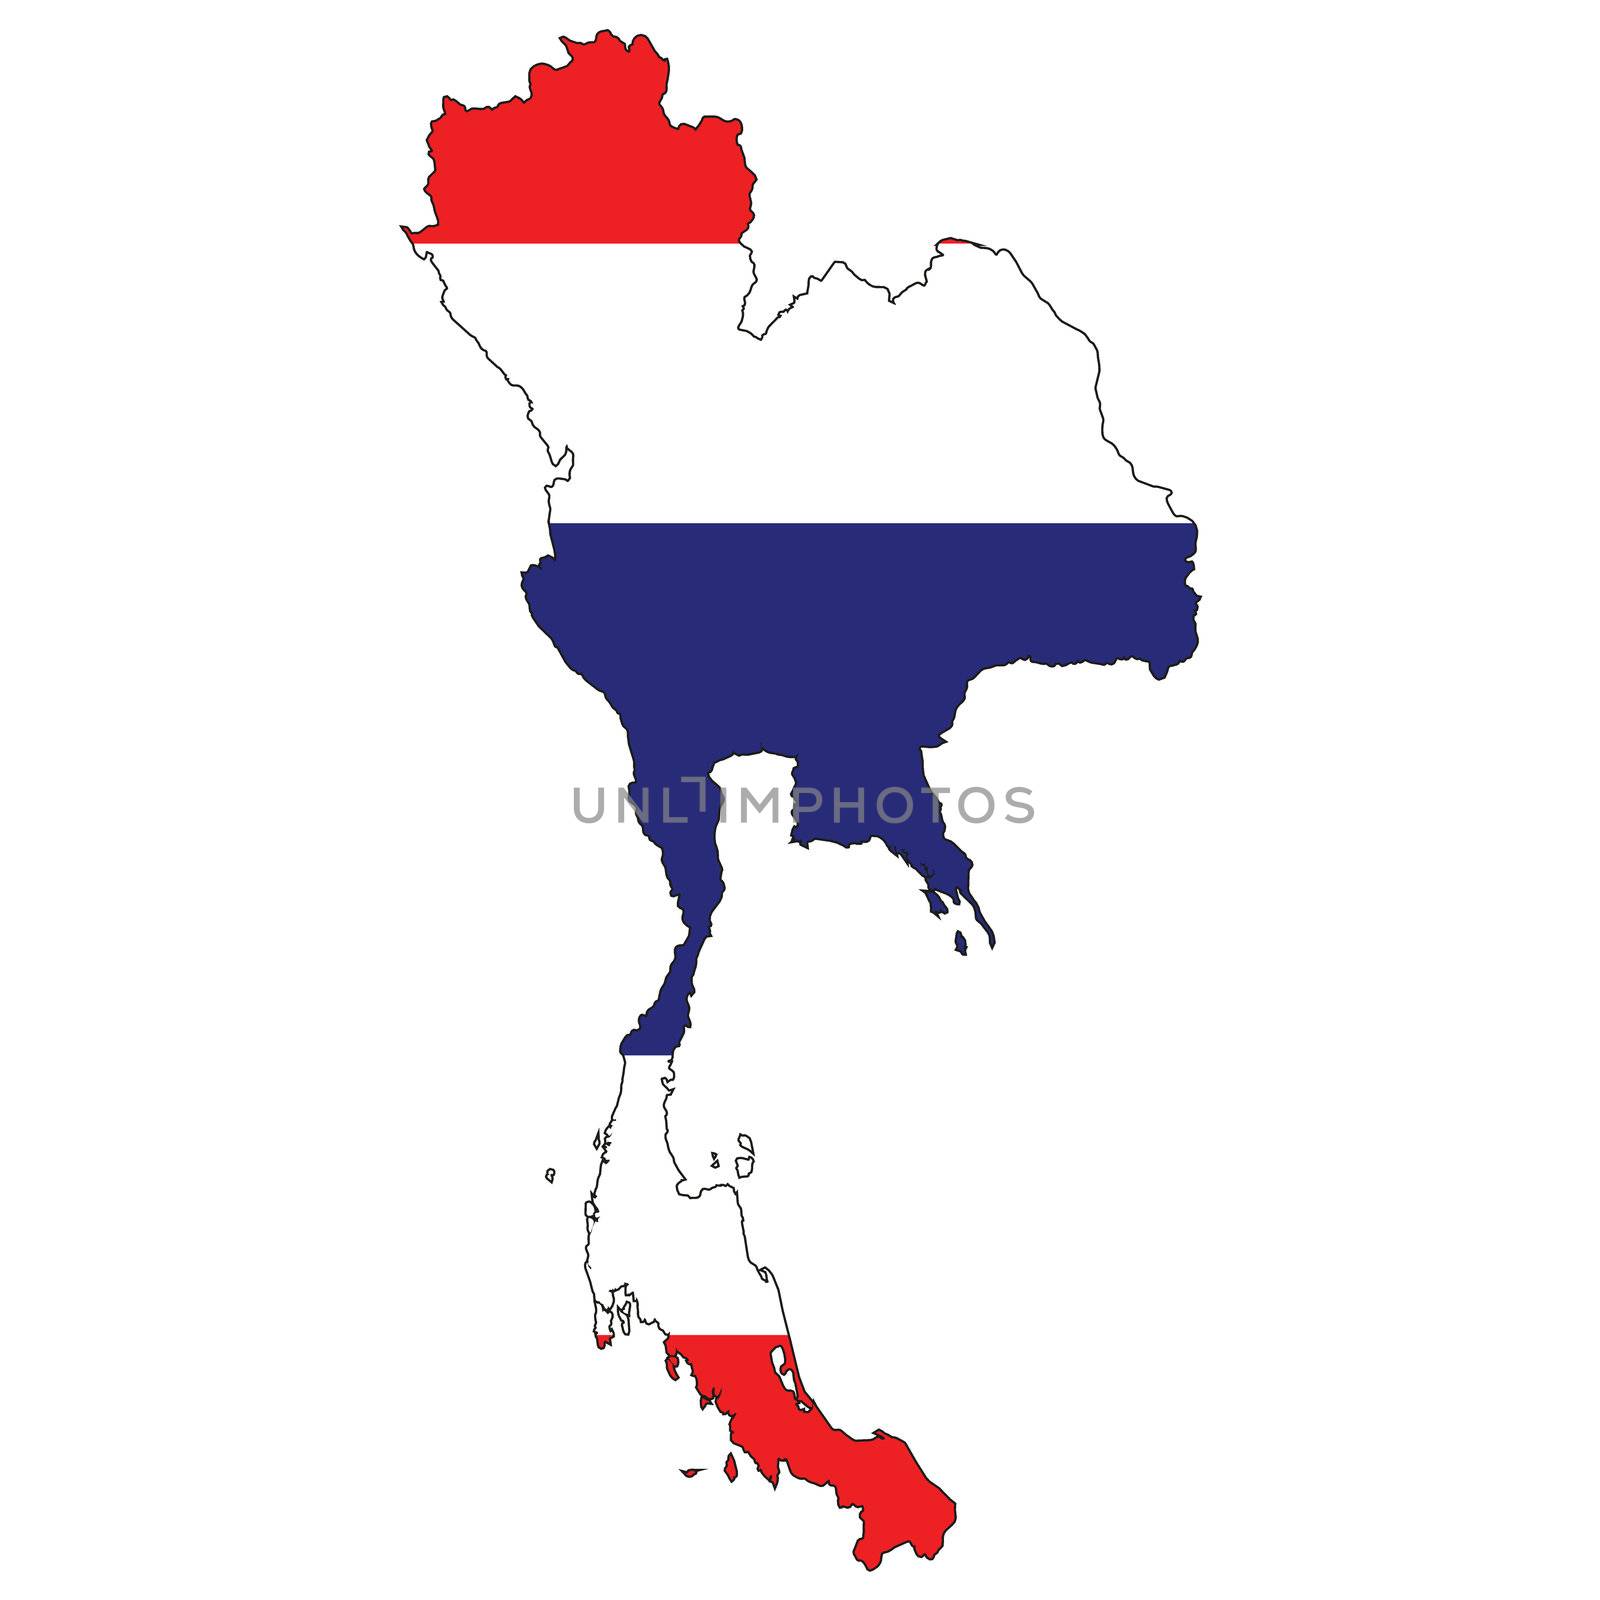 Country outline with the flag of Thailand in it